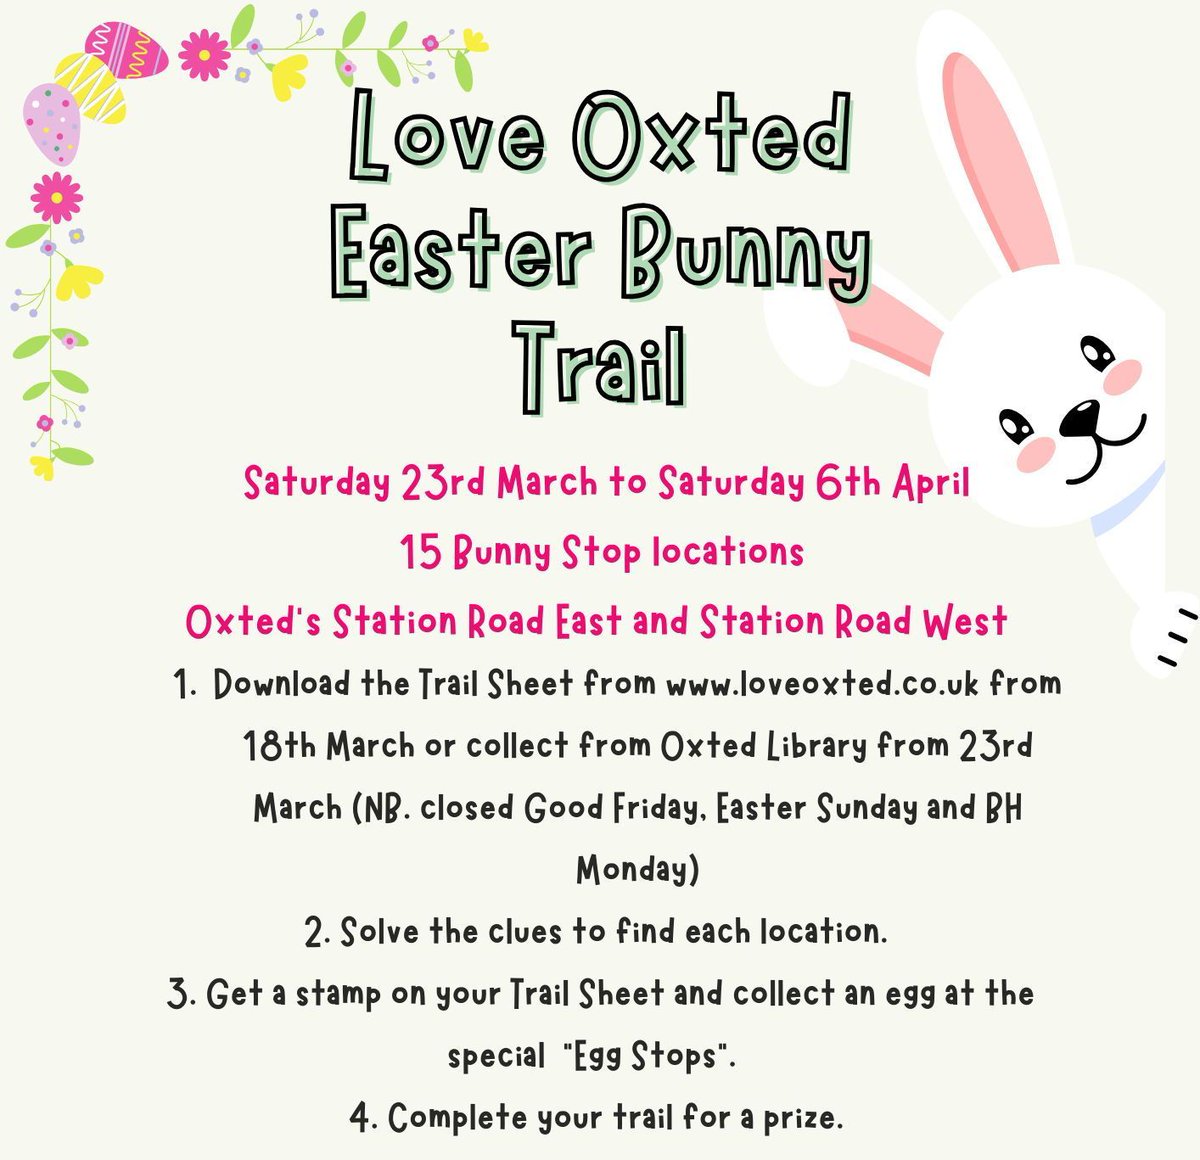 Have fun following the Easter Bunny’s travels around Oxted. Download the trail sheet (includes sheet for parents with stops) from the Love Oxted website, or pick up from the Oxted Library from Saturday 23rd March. buff.ly/43kbQKI